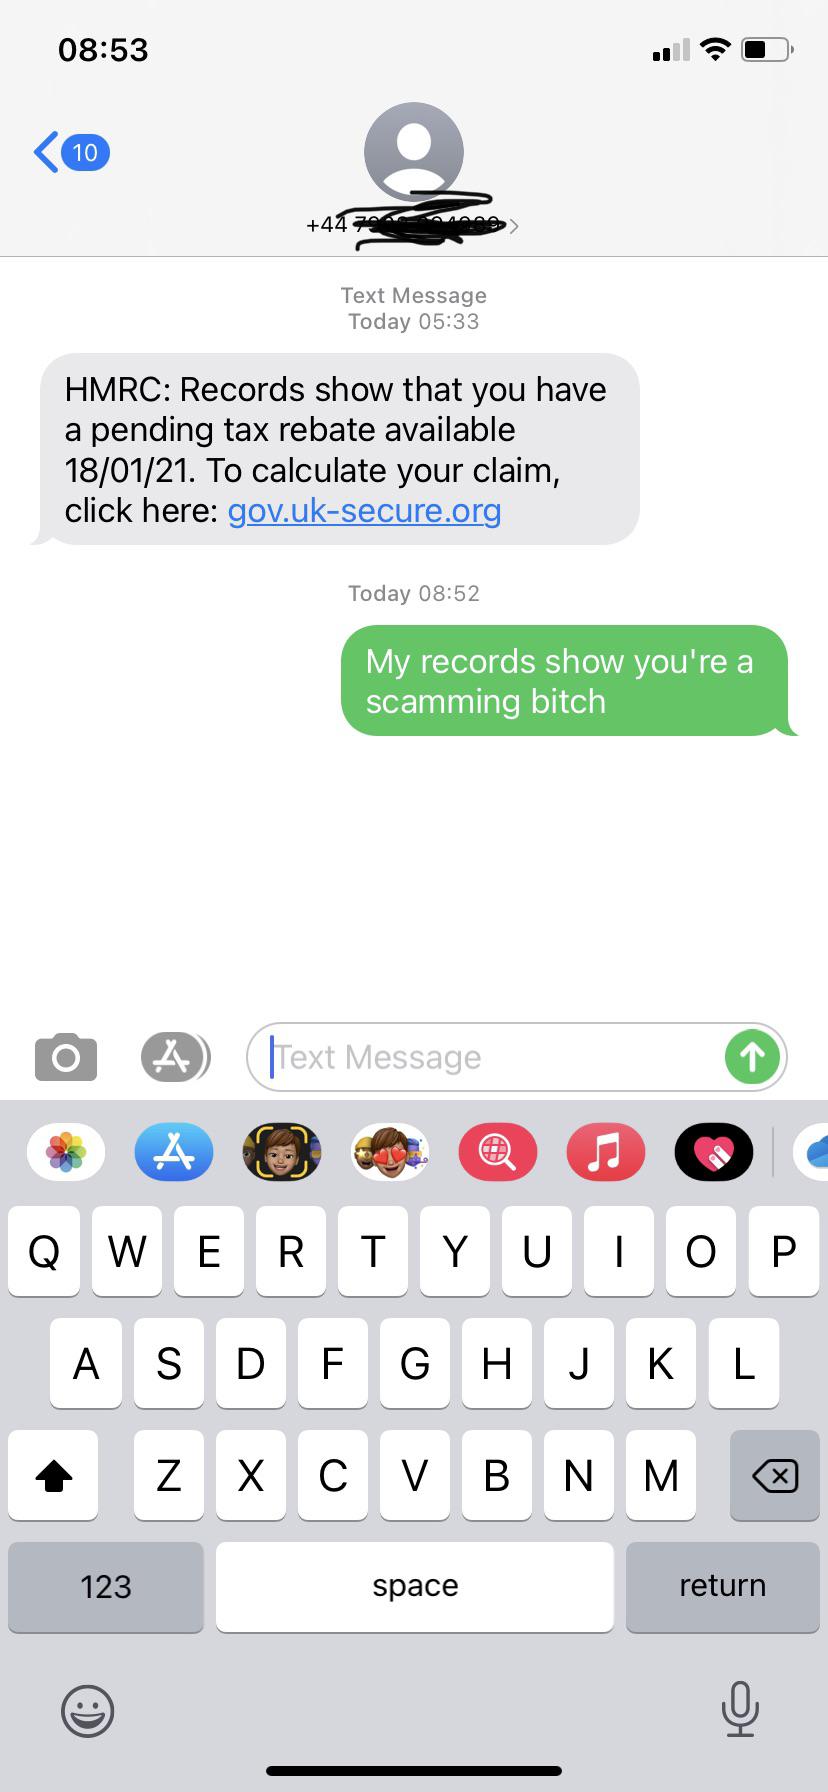 An example of HMRC phishing texts. Source: Reddit